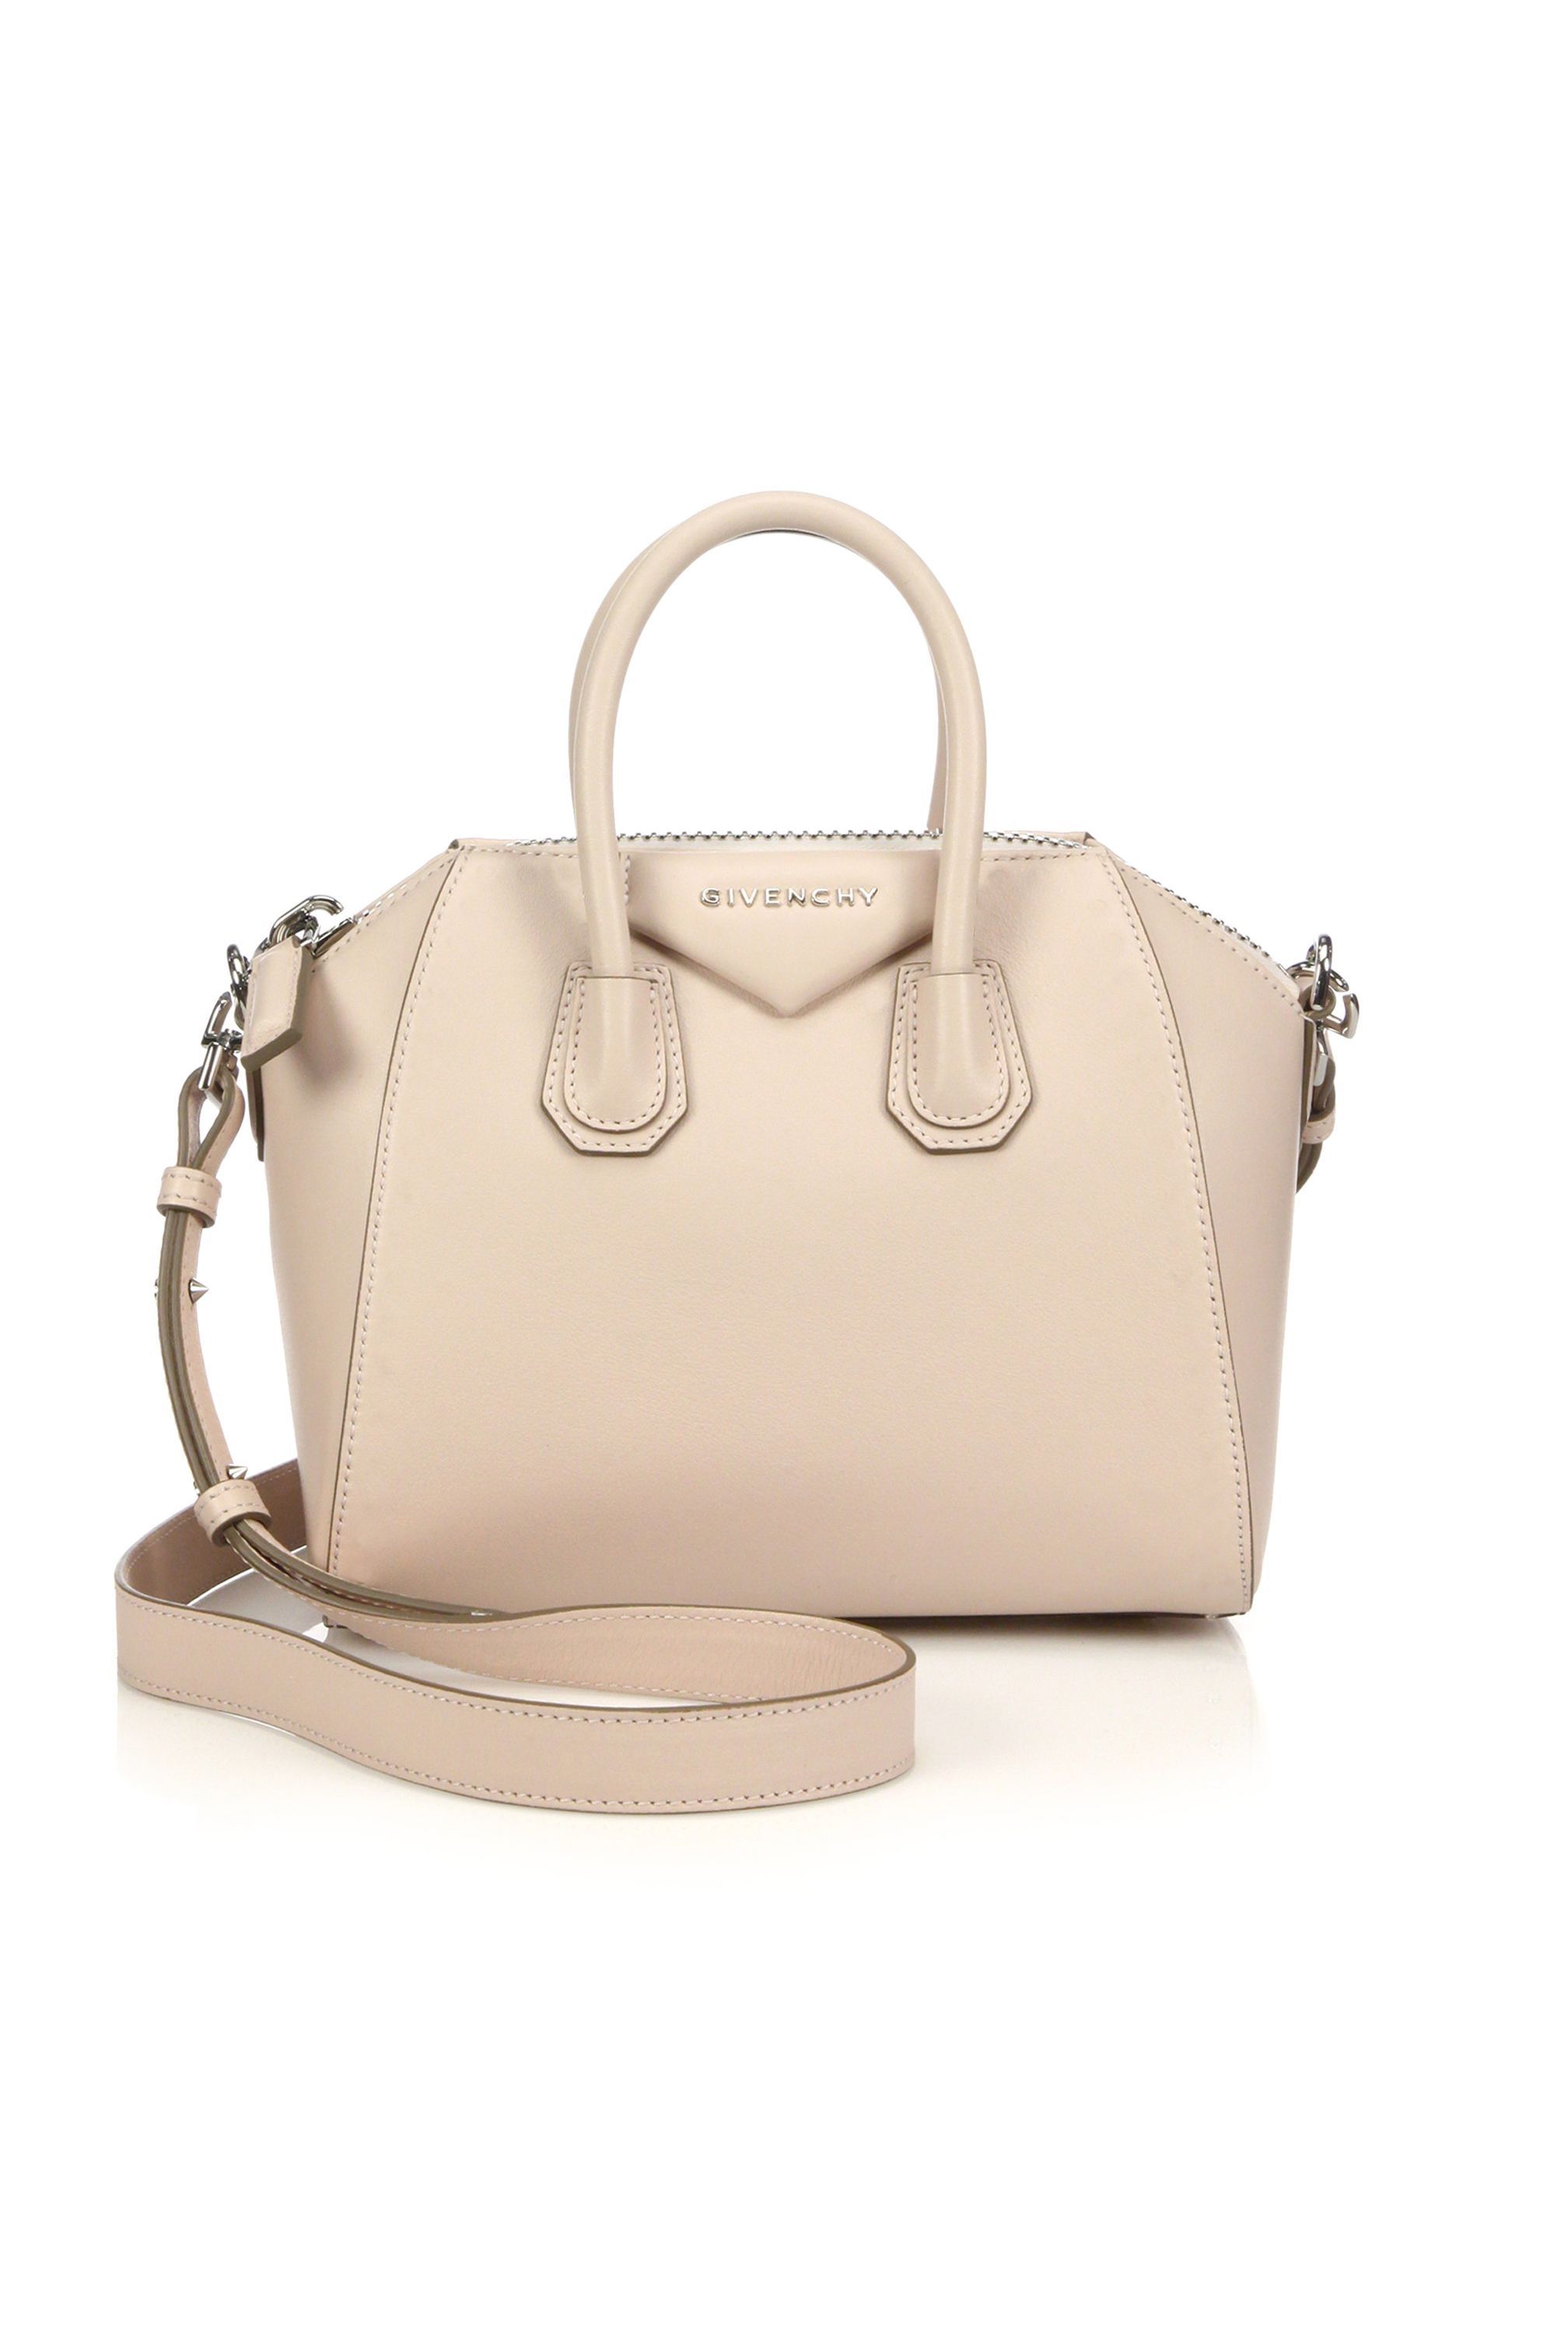 givenchy bags amazon